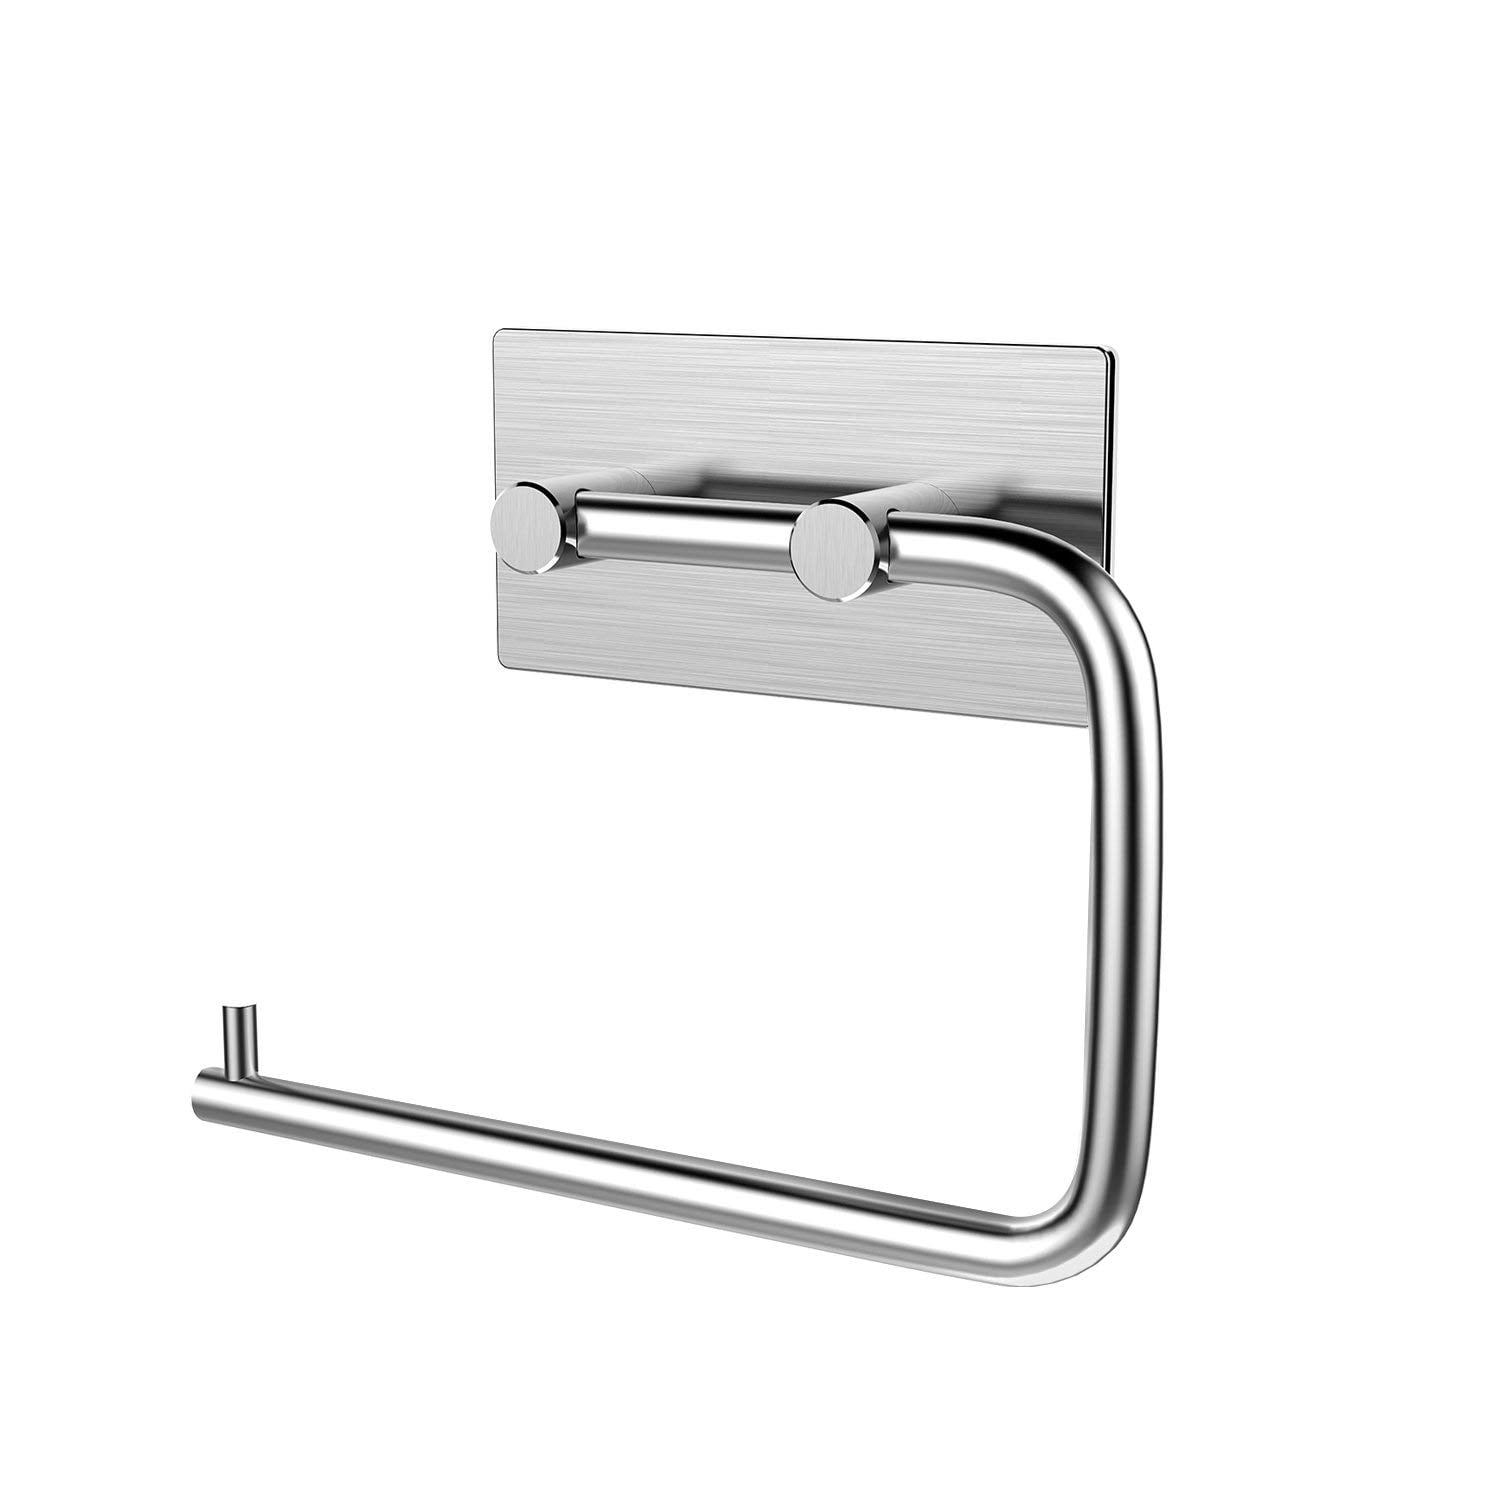 Details about   Retro Toilet Roll Holder Wall Mounted Tissue Paper Stand Space Aluminum Bathroom